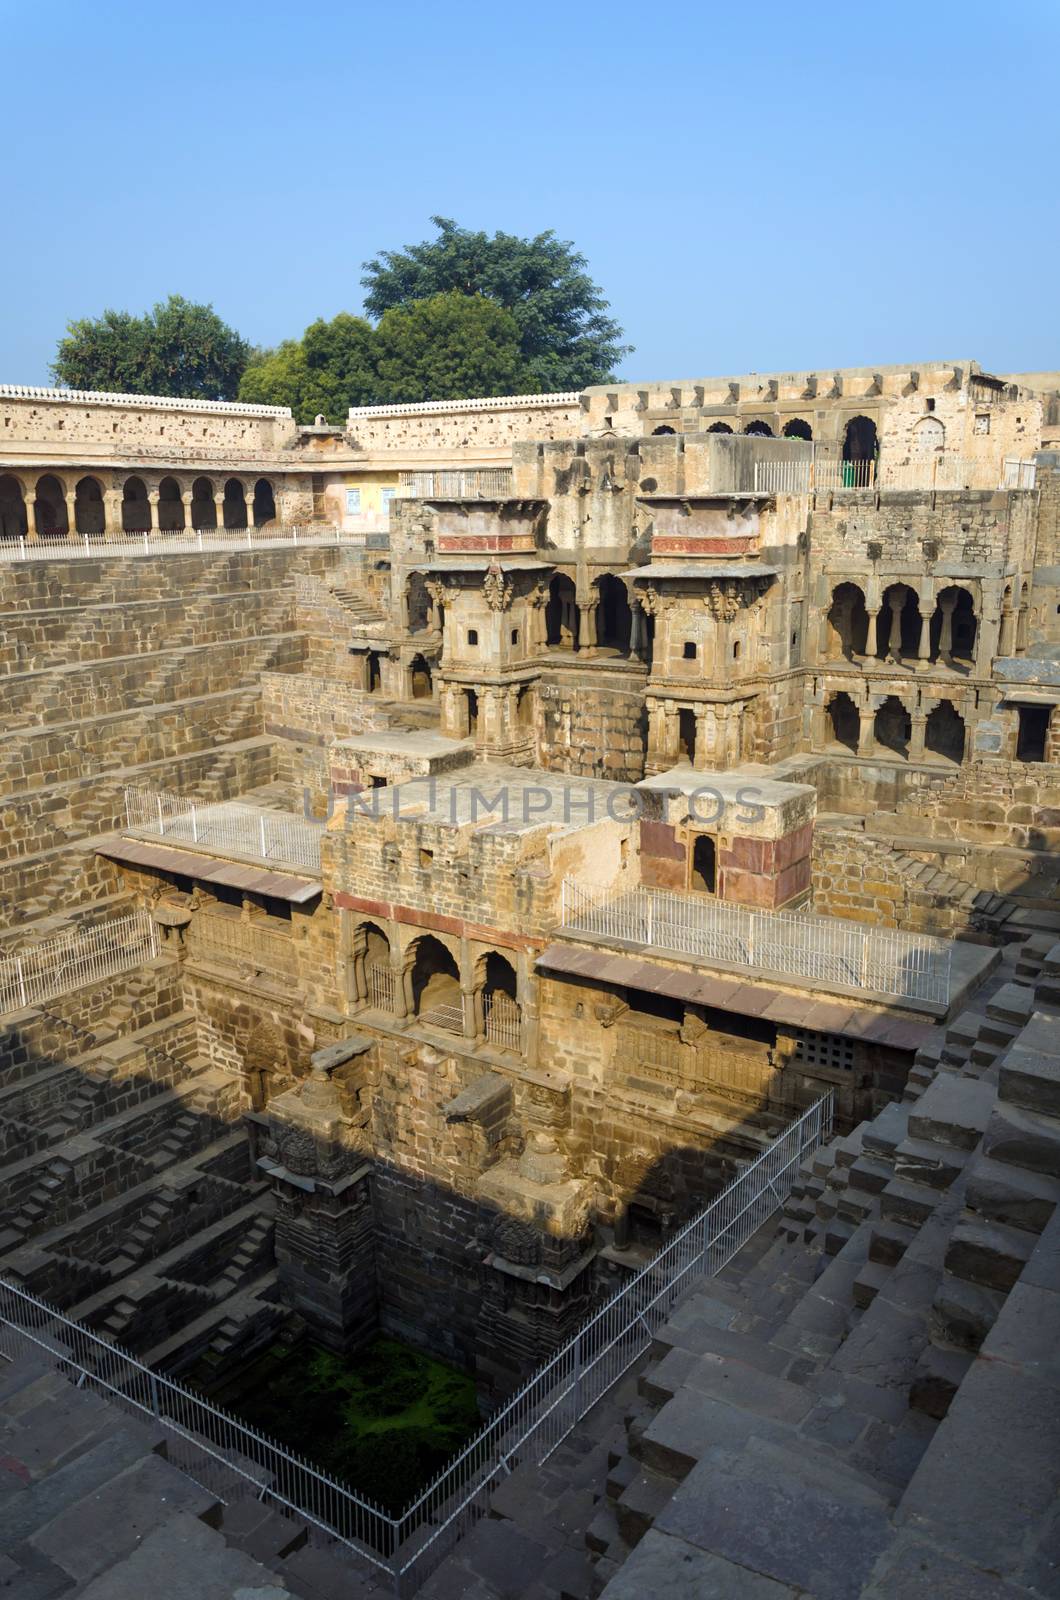 Chand Baori Stepwell in the village of Abhaneri, Rajasthan, India. 